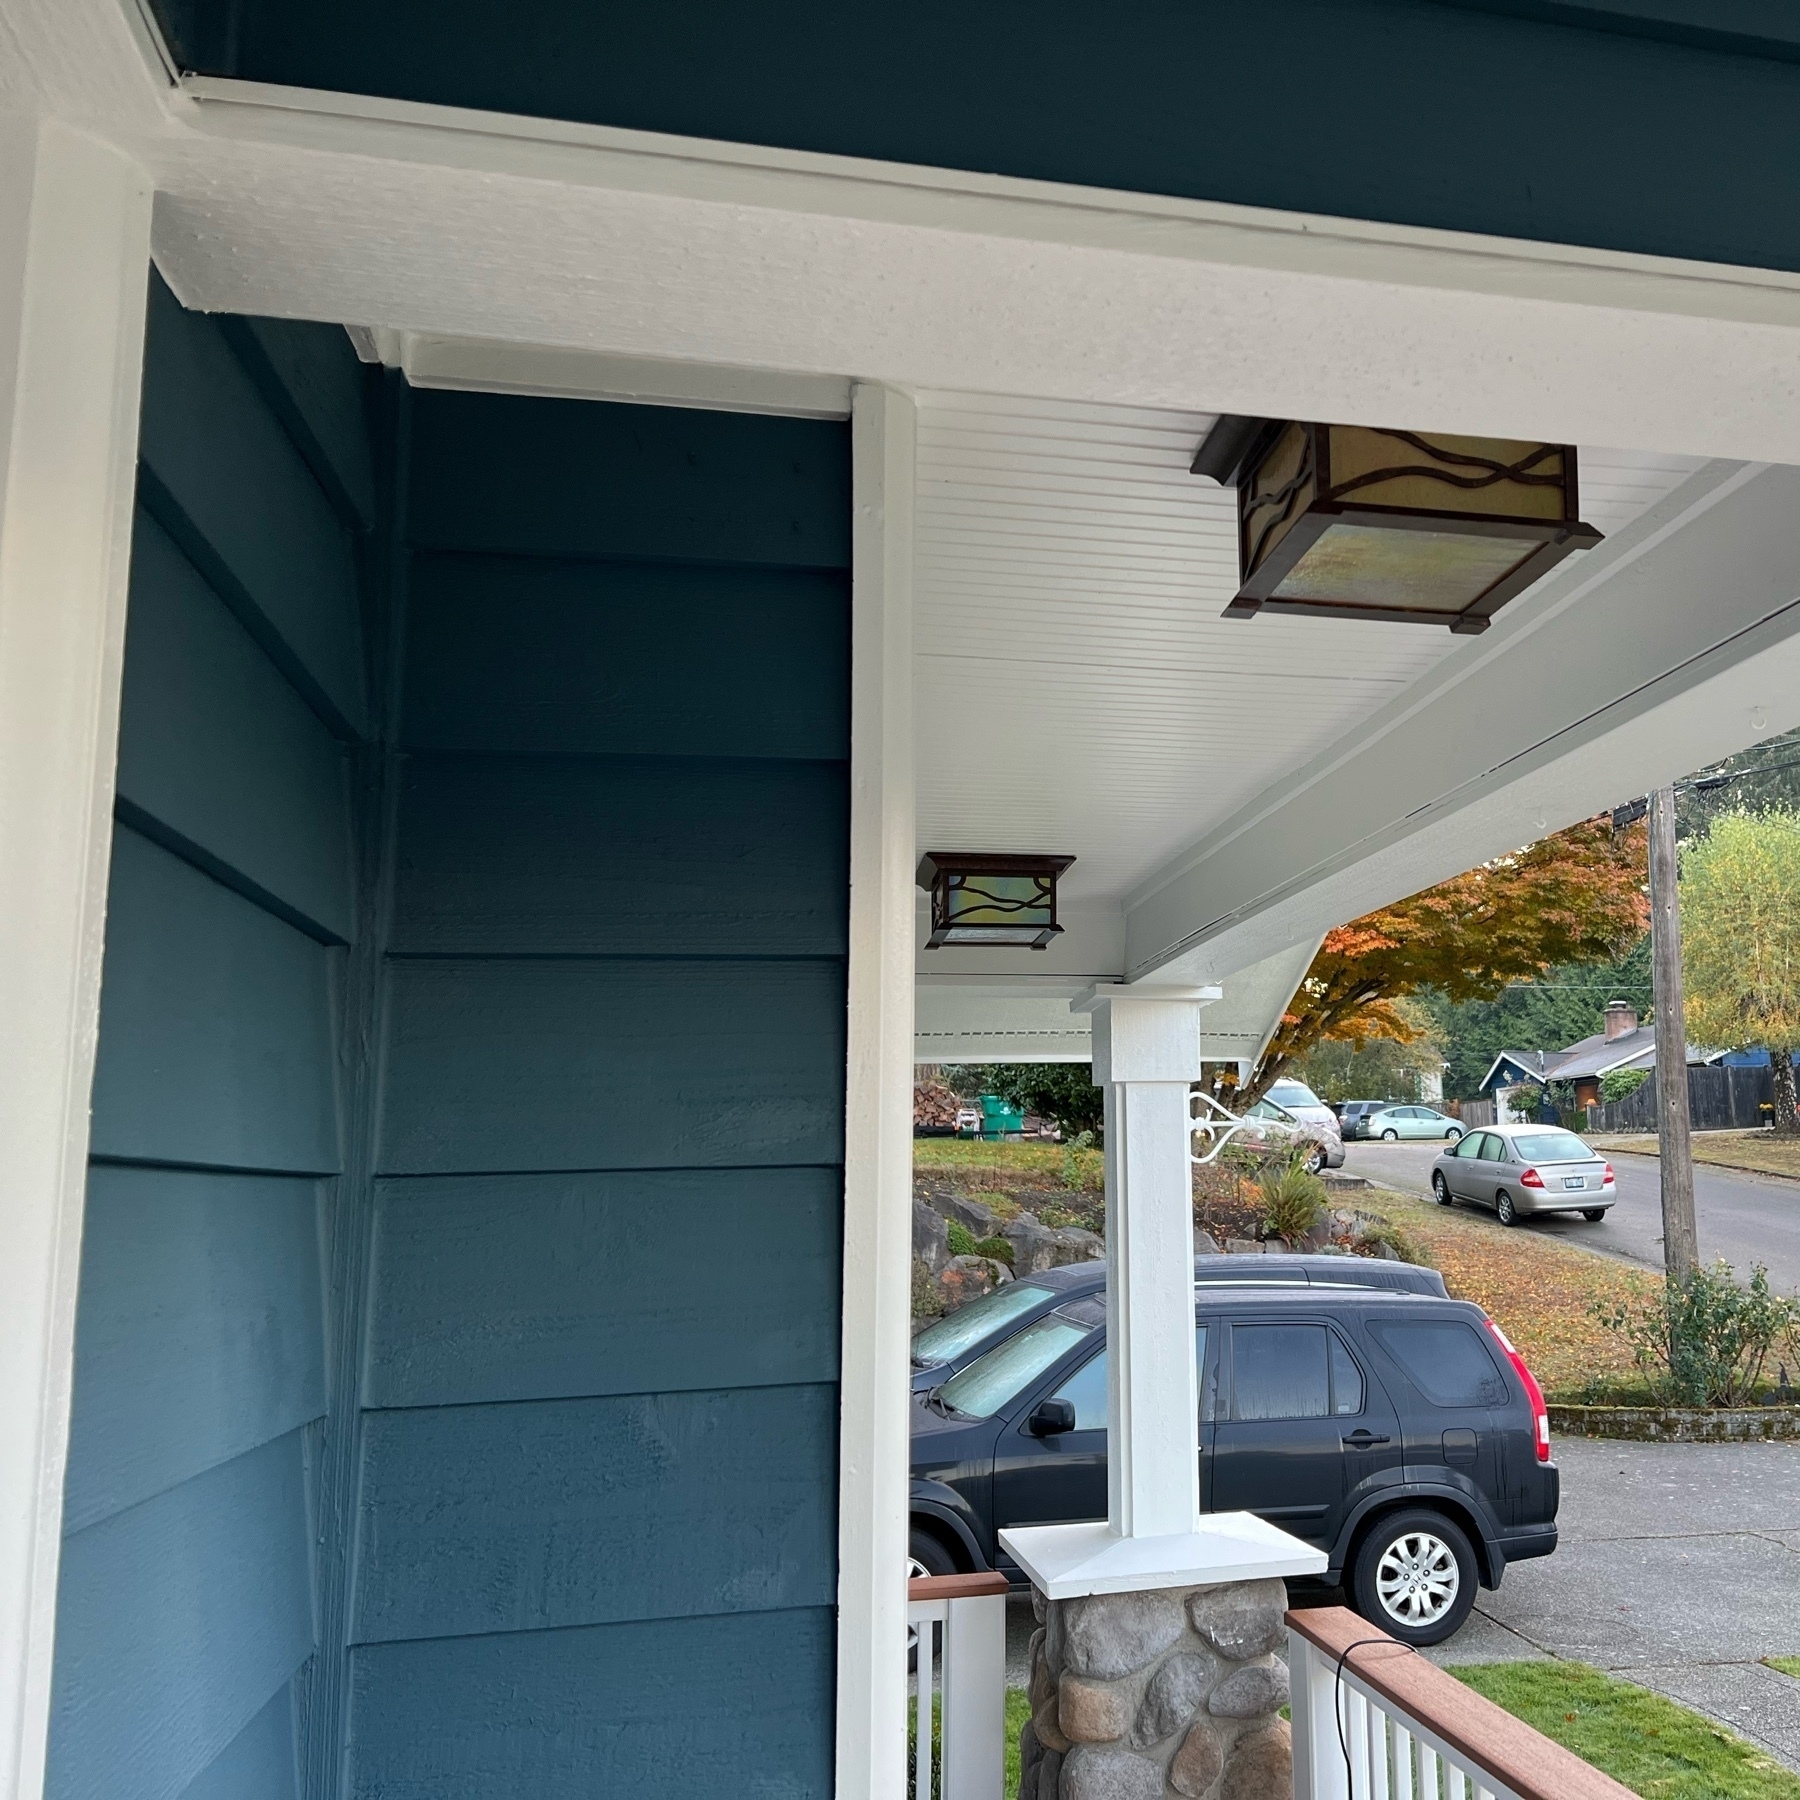 Side view of the small front porch, with two square arts and crafts styles lights overhead.